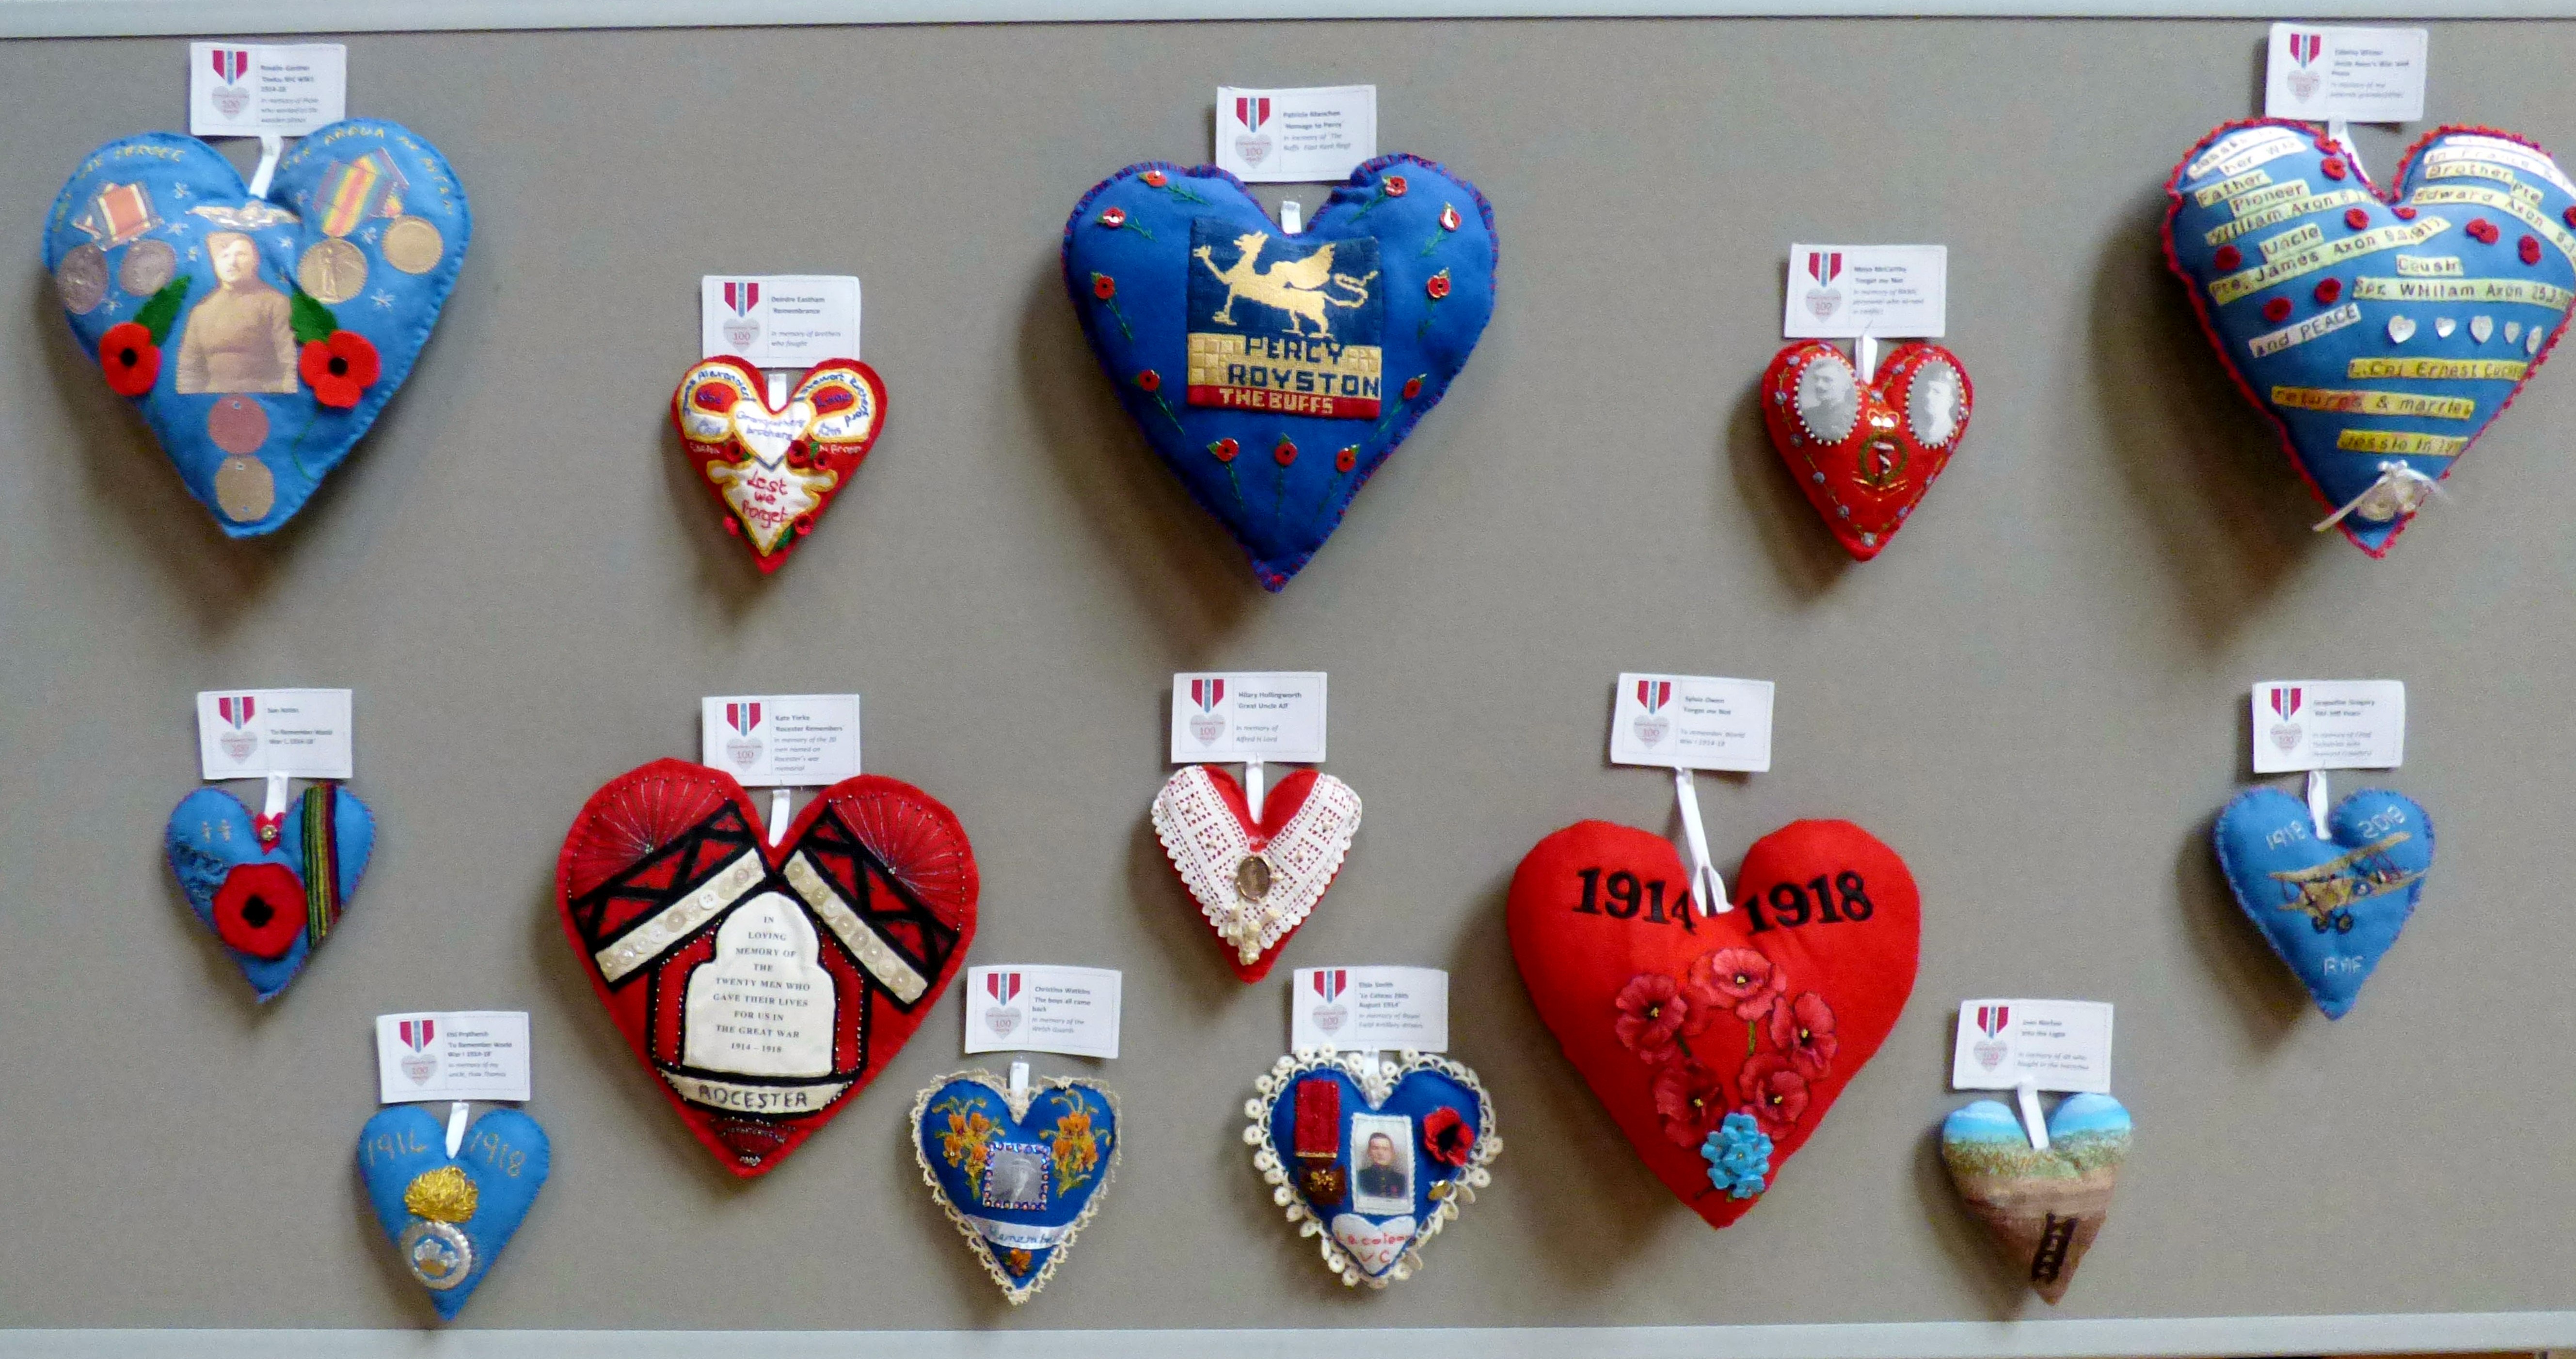 100 Hearts exhibition, Liverpool Cathedral, Sept 2018